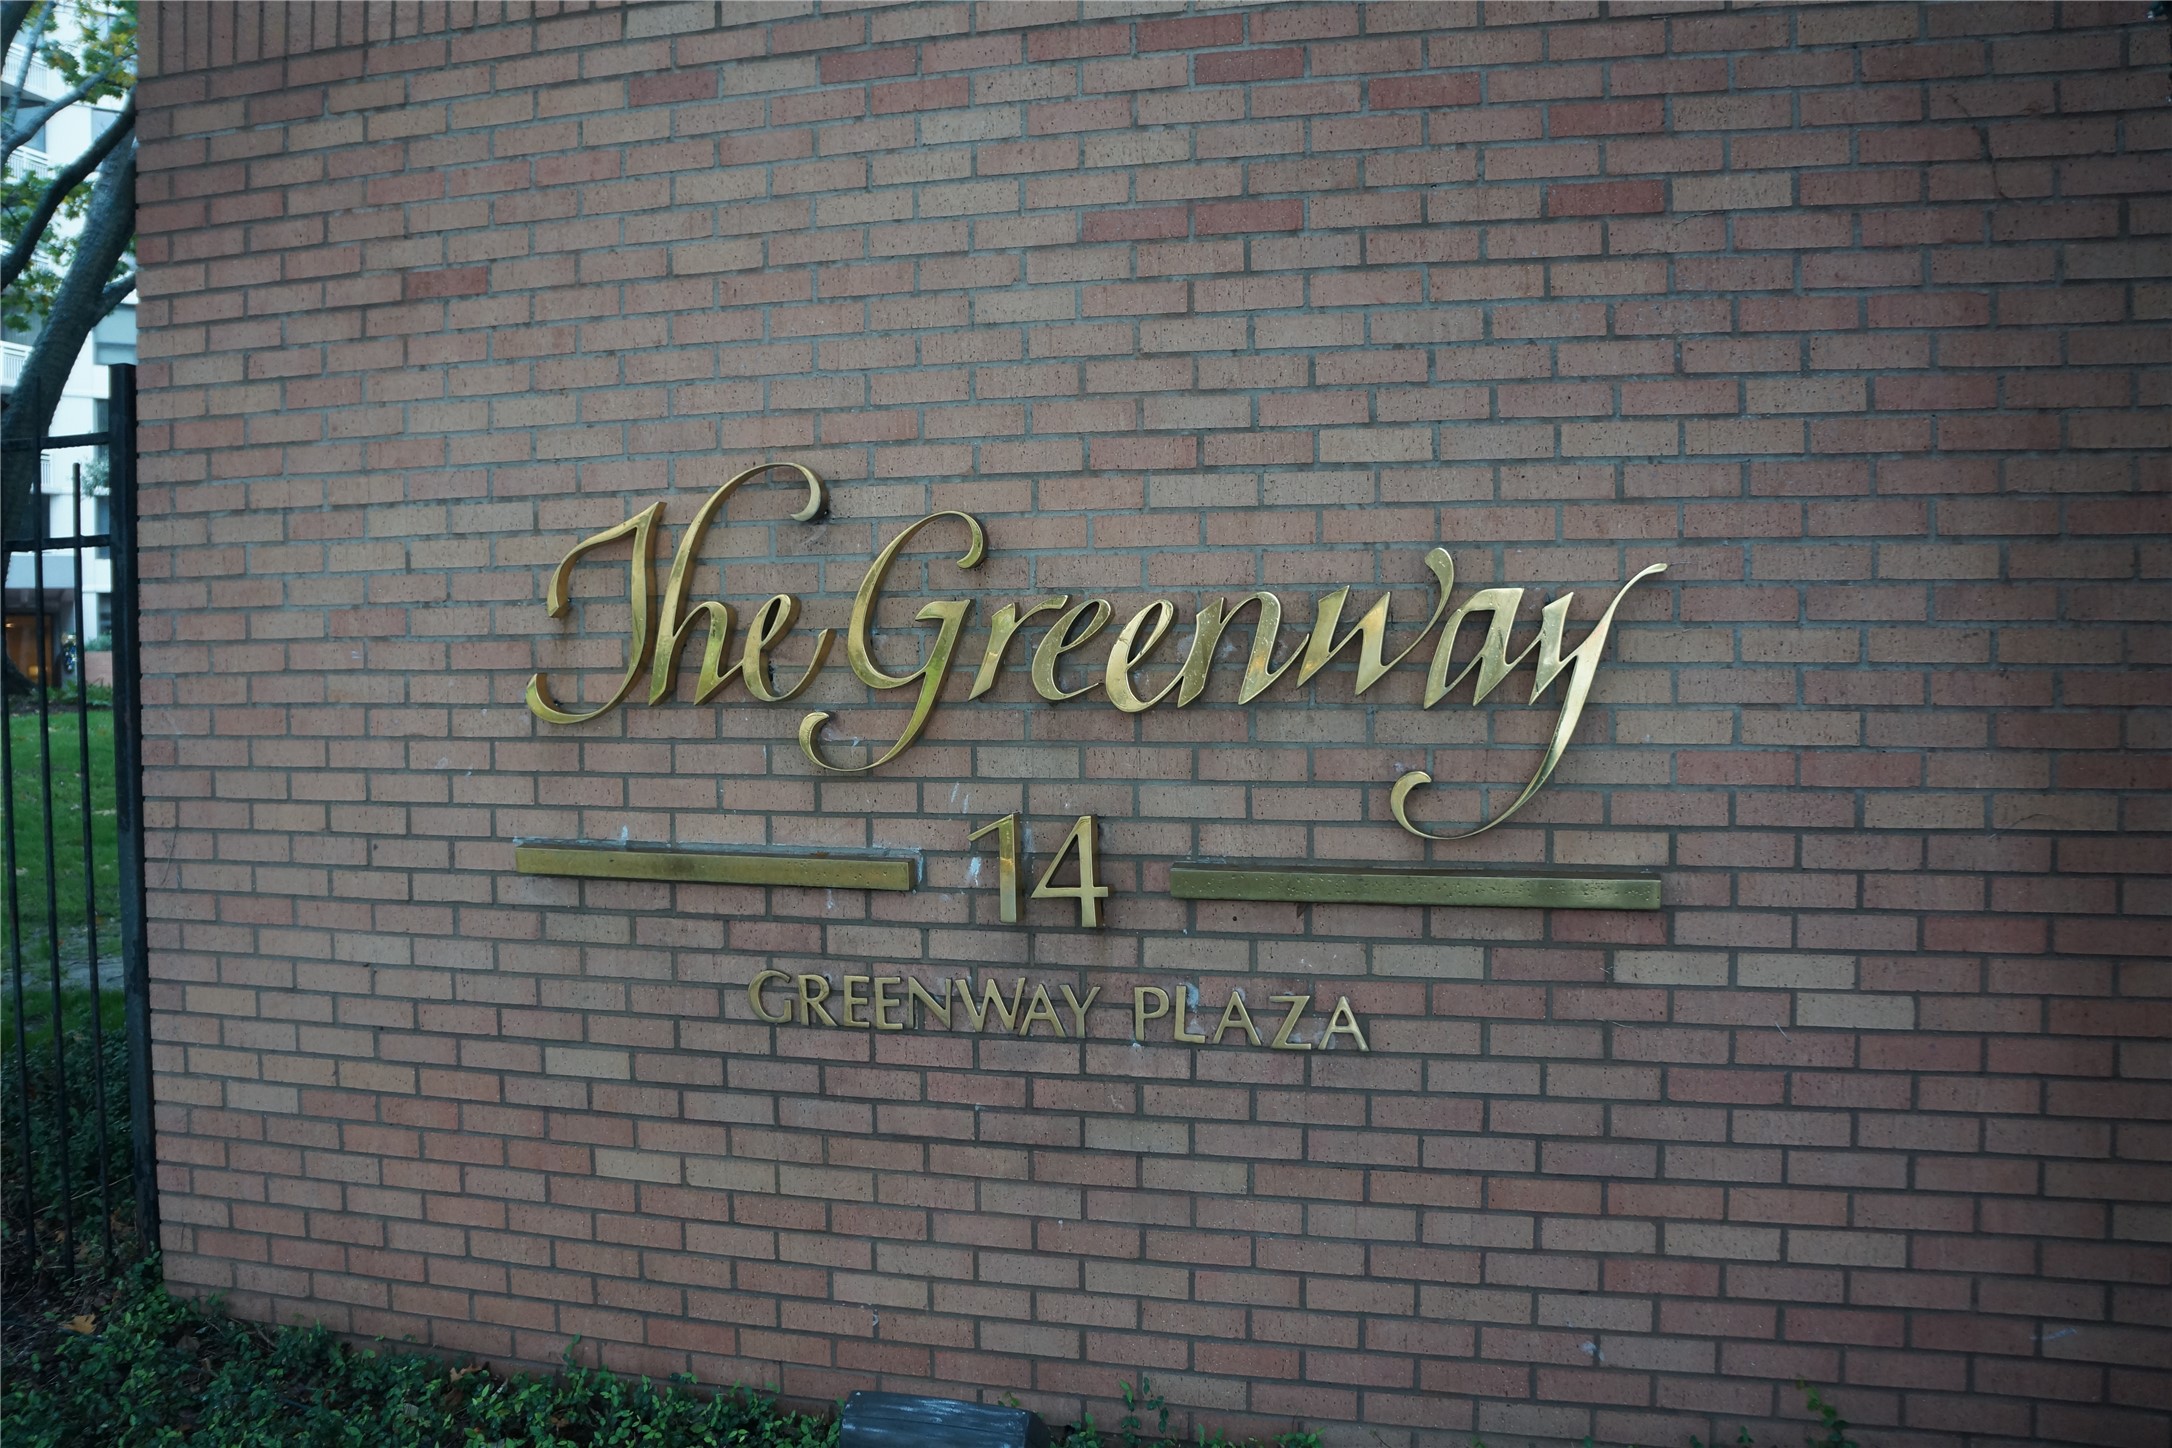 Entrance to the Greenway Condo grounds